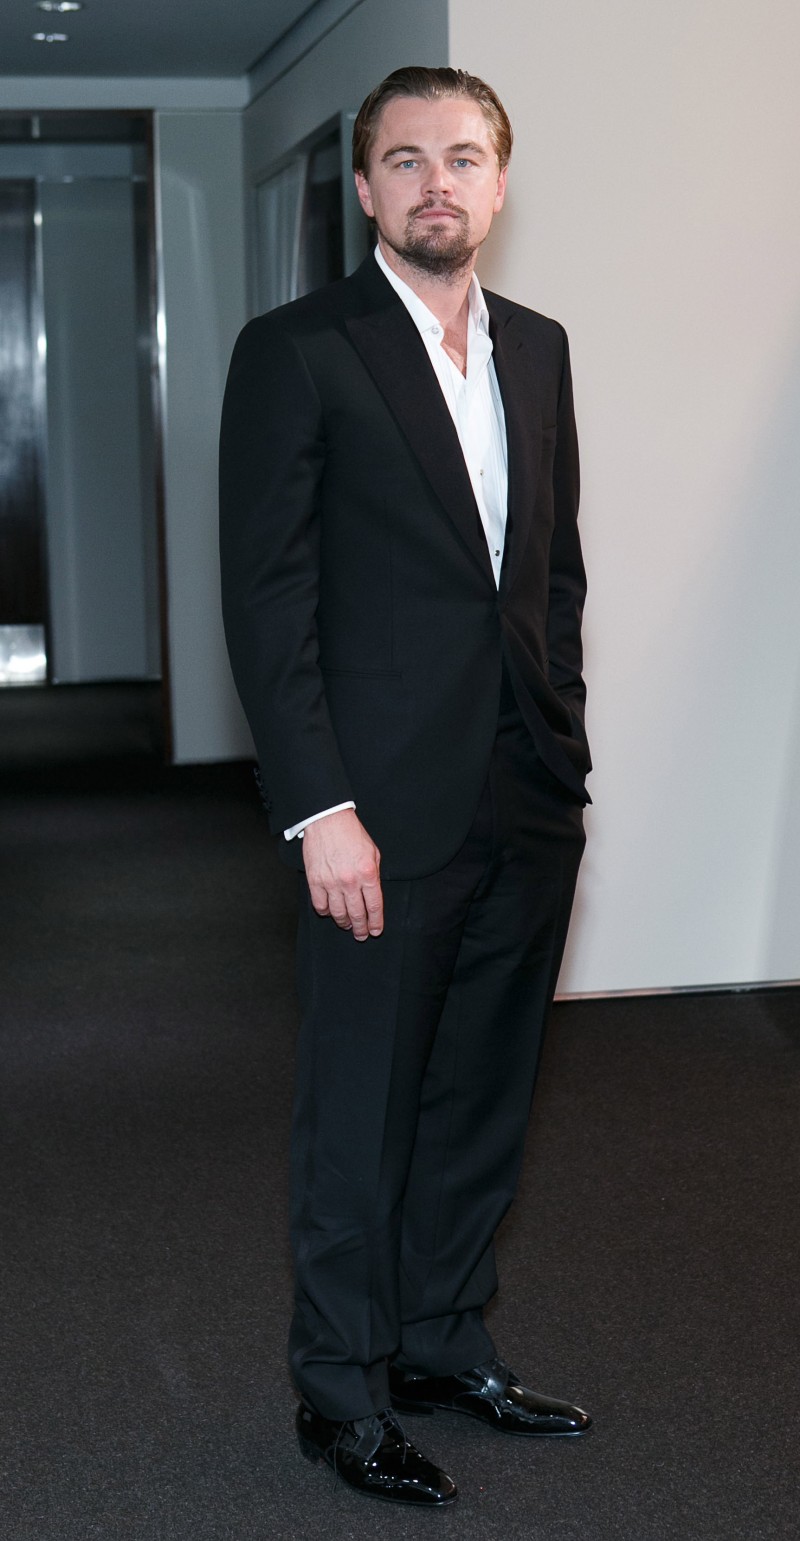 Leonardo DiCaprio wearing a Brioni Tuxedo at the Christies Auction